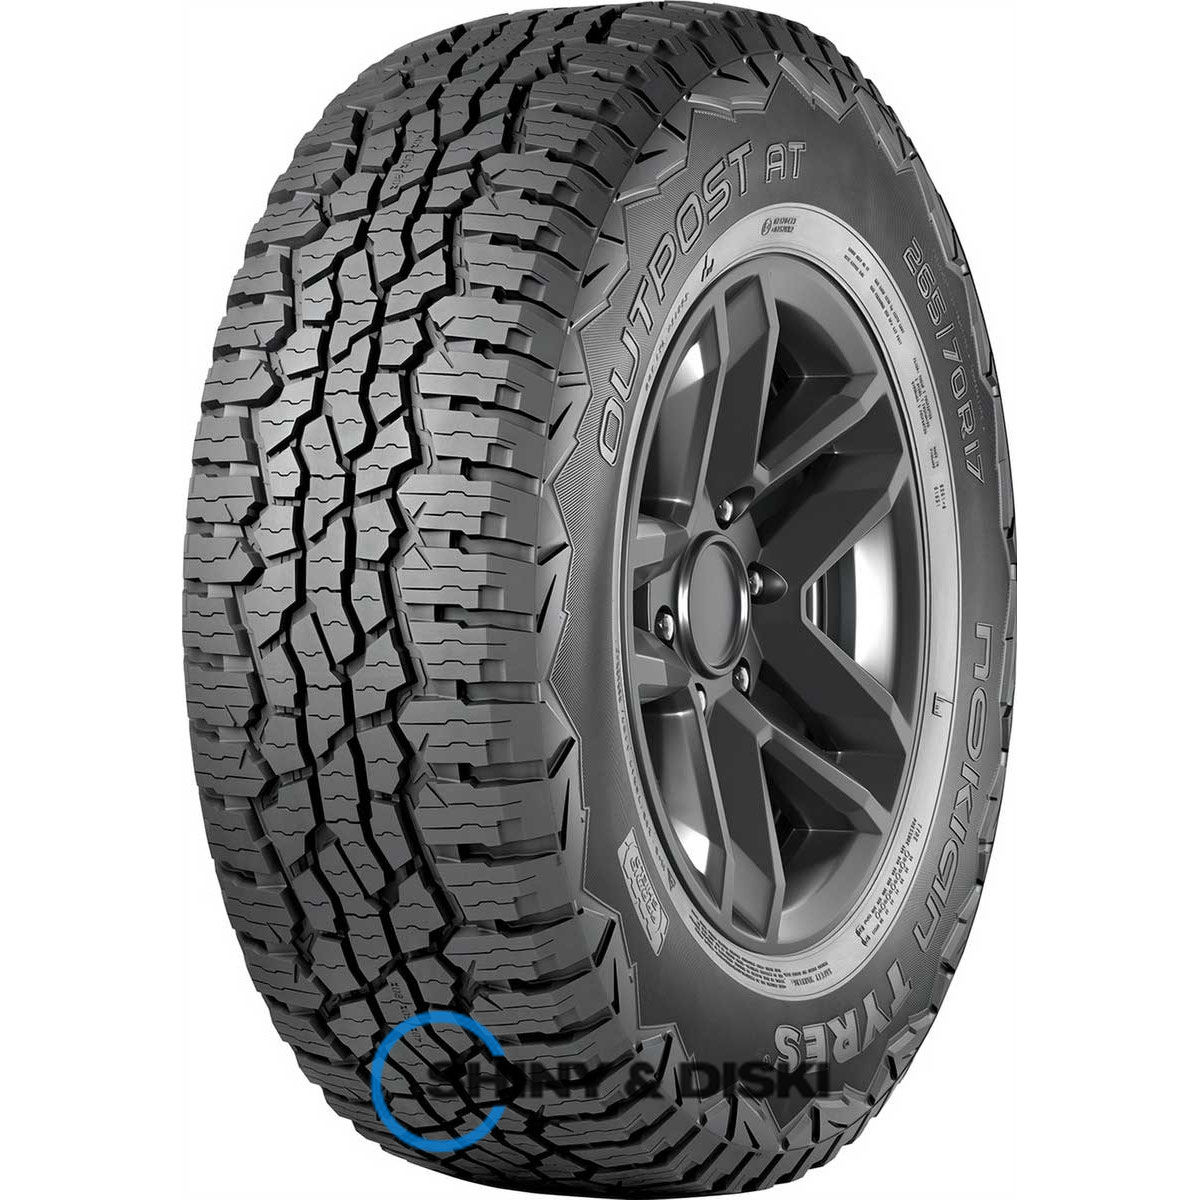 nokian outpost at 315/70 r17 121/118s